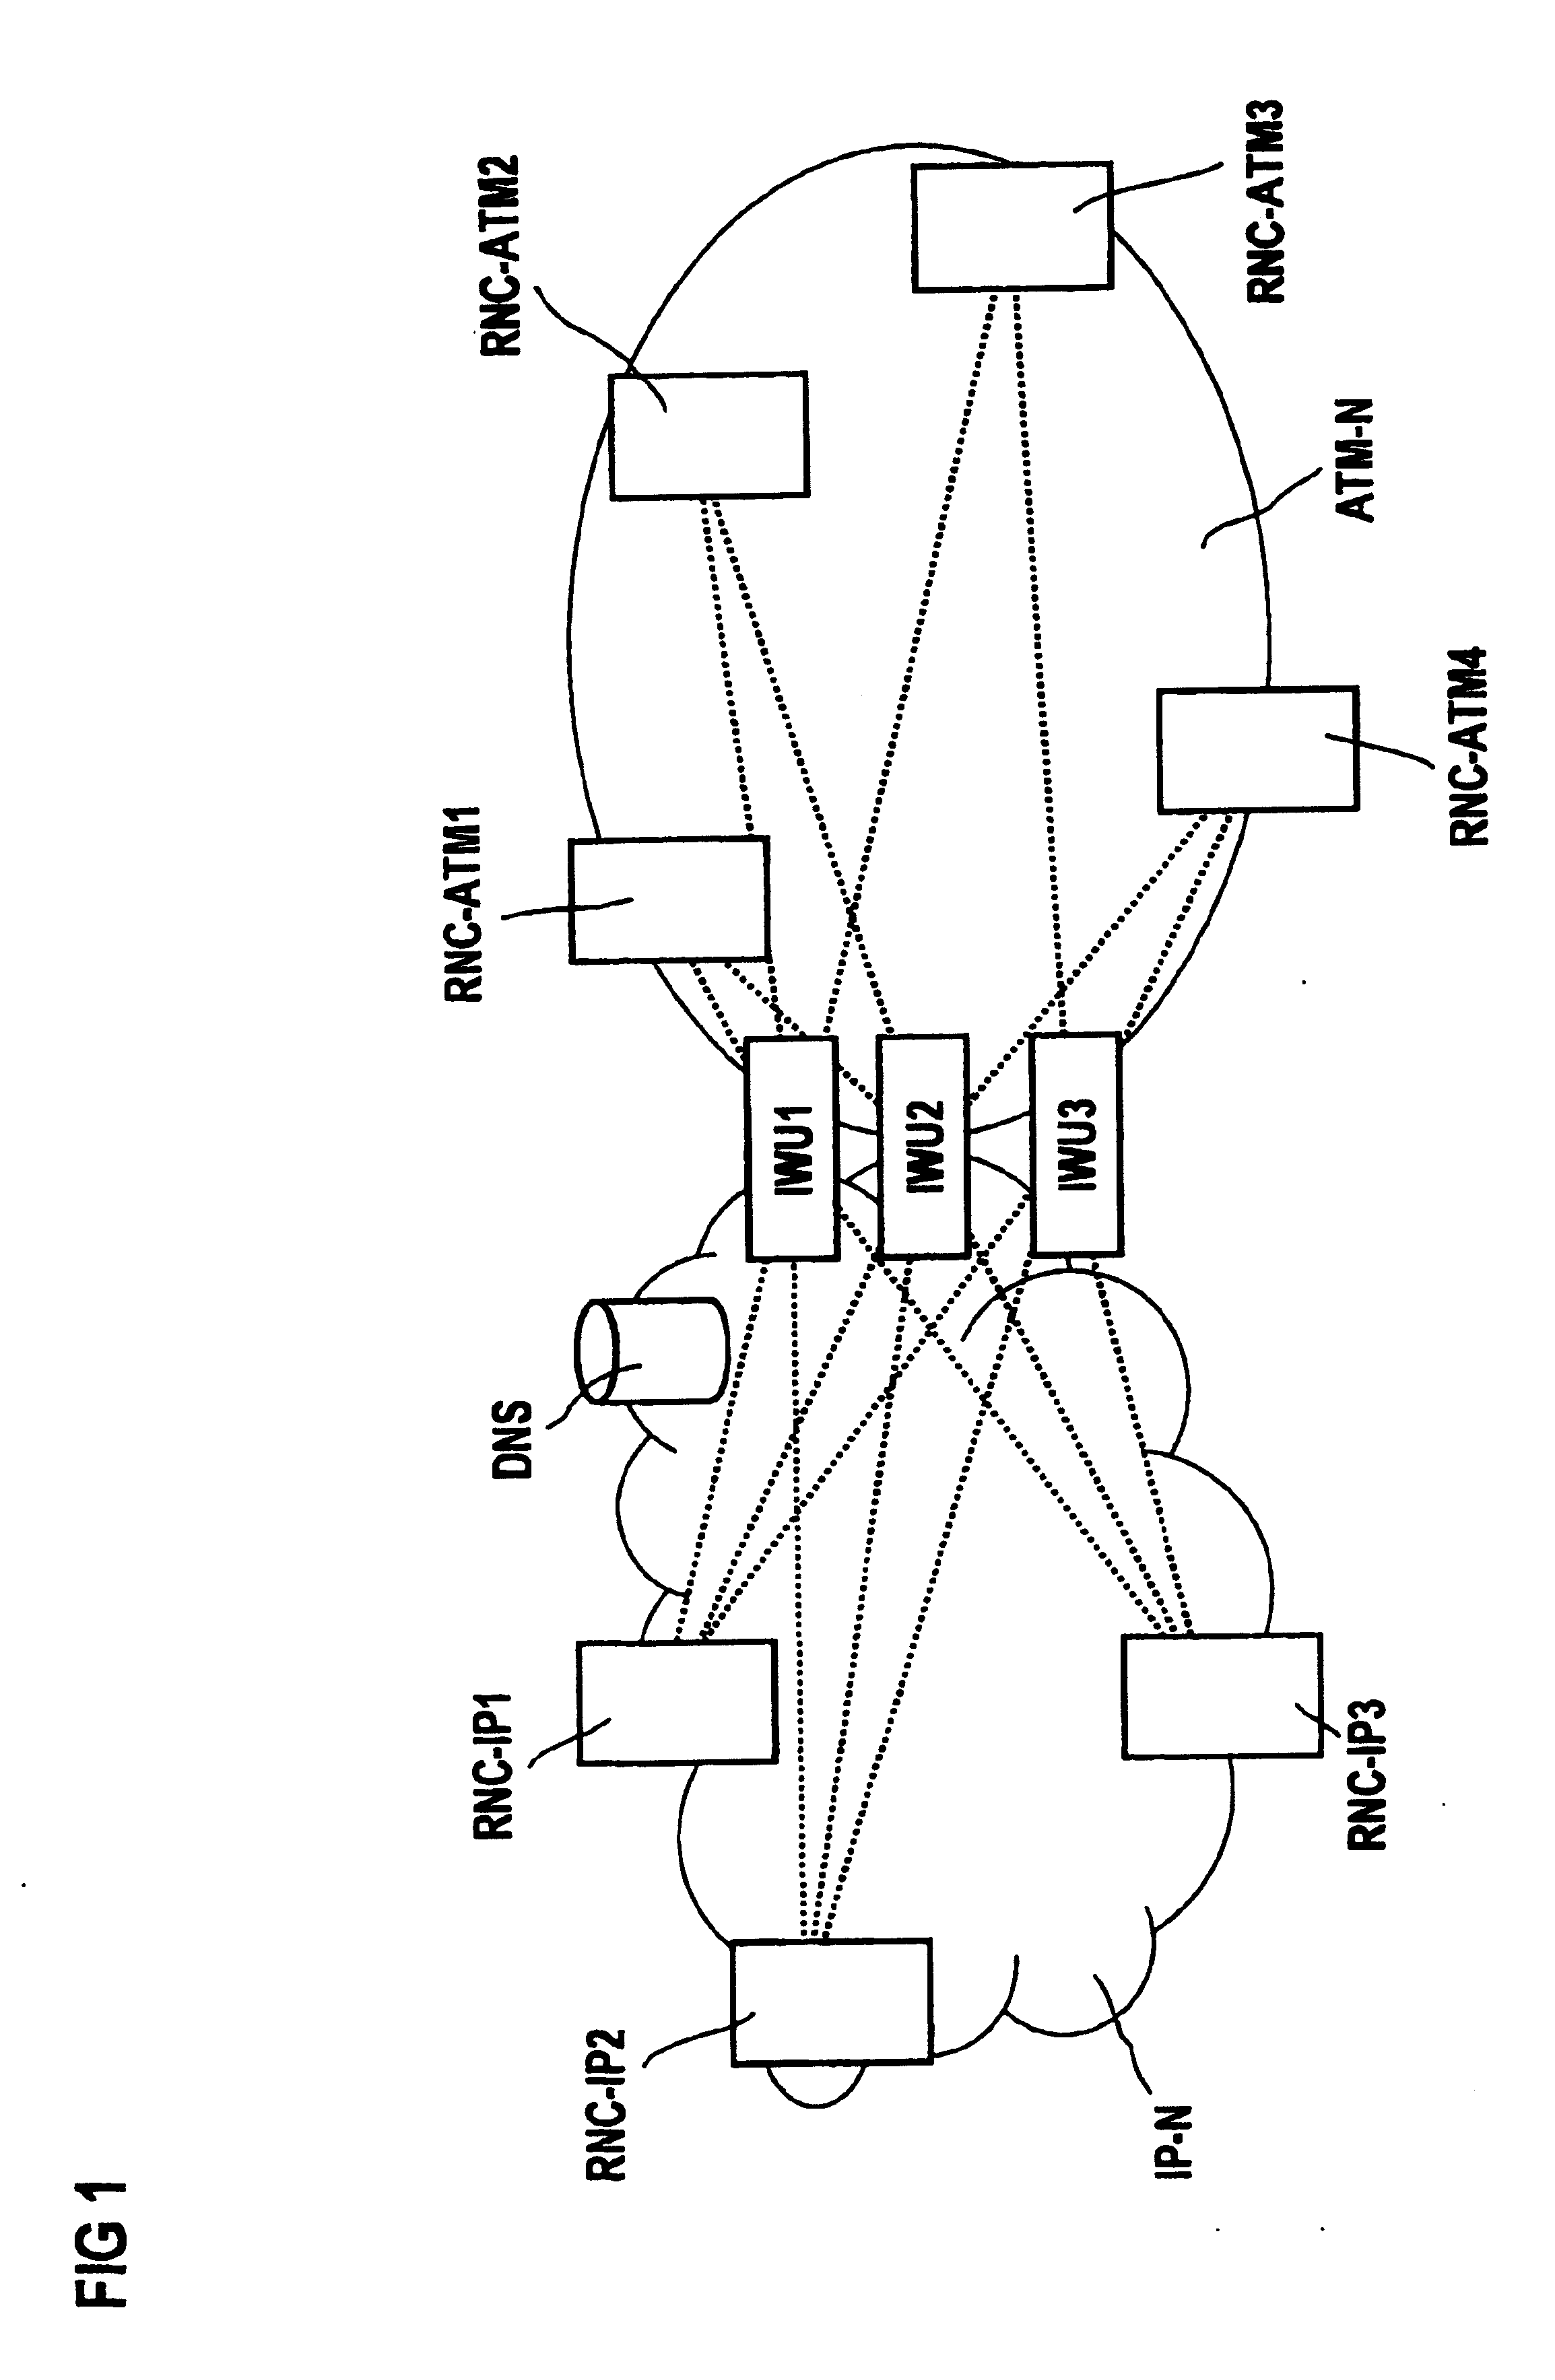 Radio communication system and method for the operation thereof